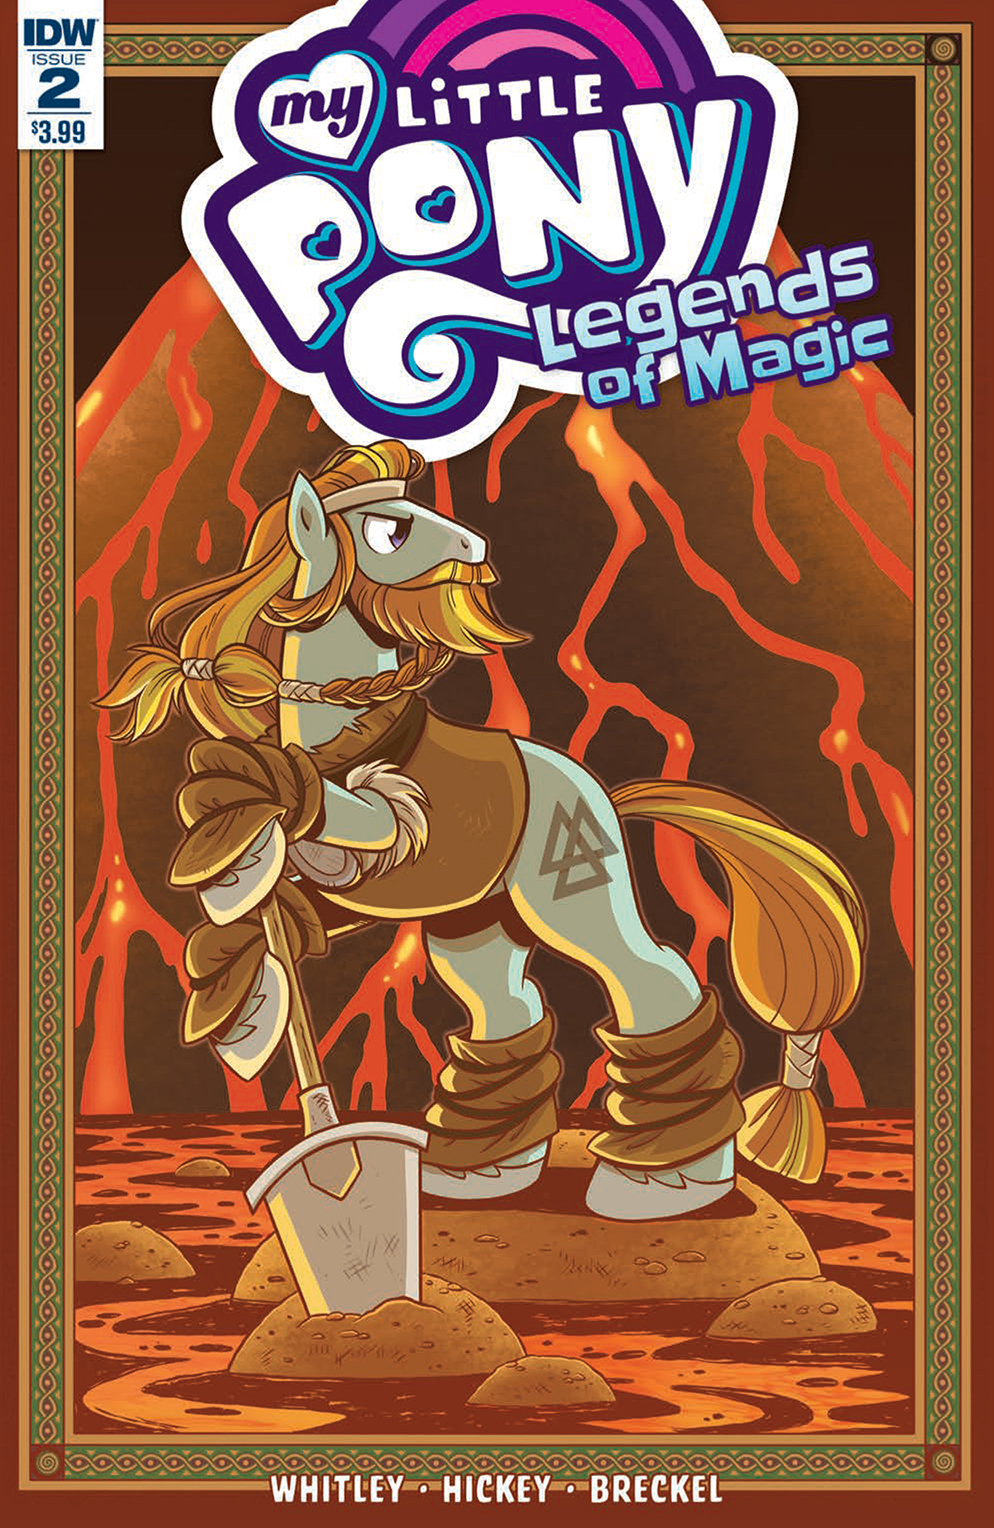 EXCLUSIVE PREVIEW: My Little Pony: Legends of Magic #2 - IDW Publishing